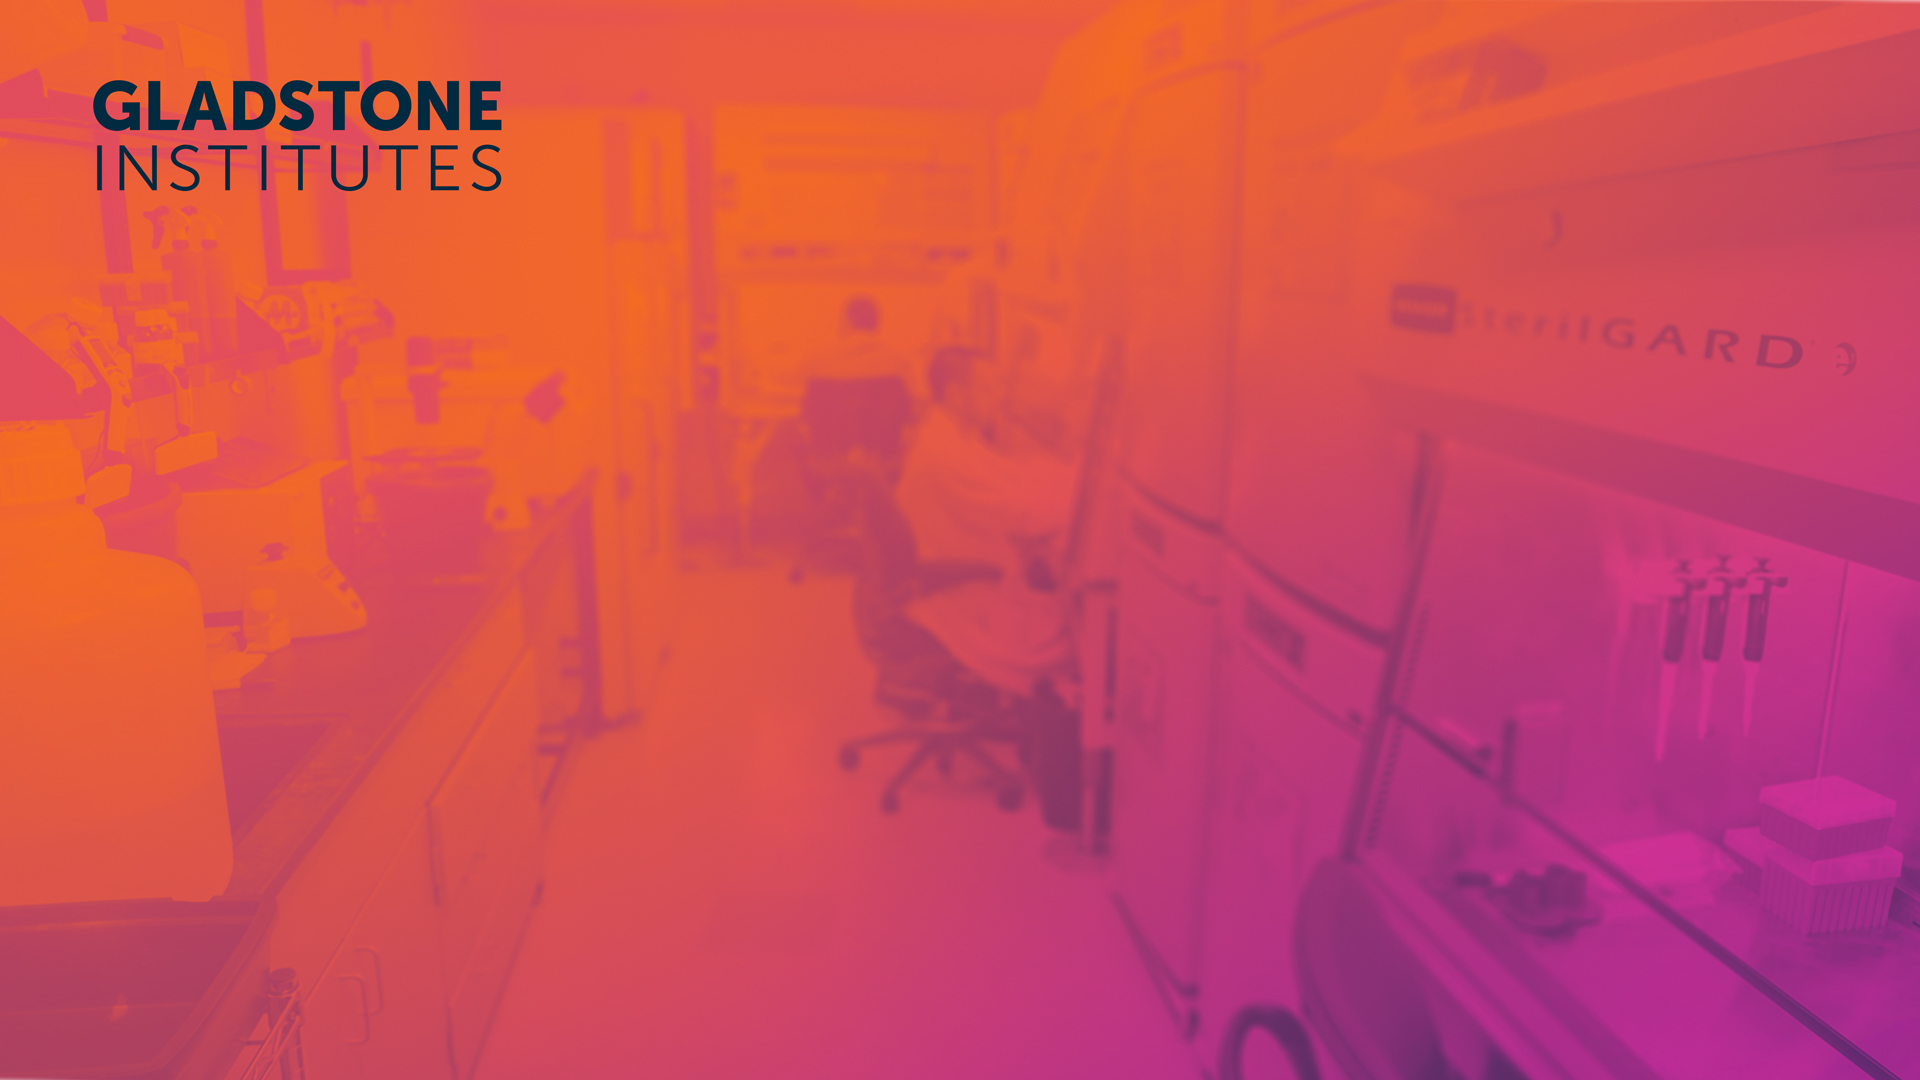 Zoom background photo of researchers in lab with orange and purple photo filter